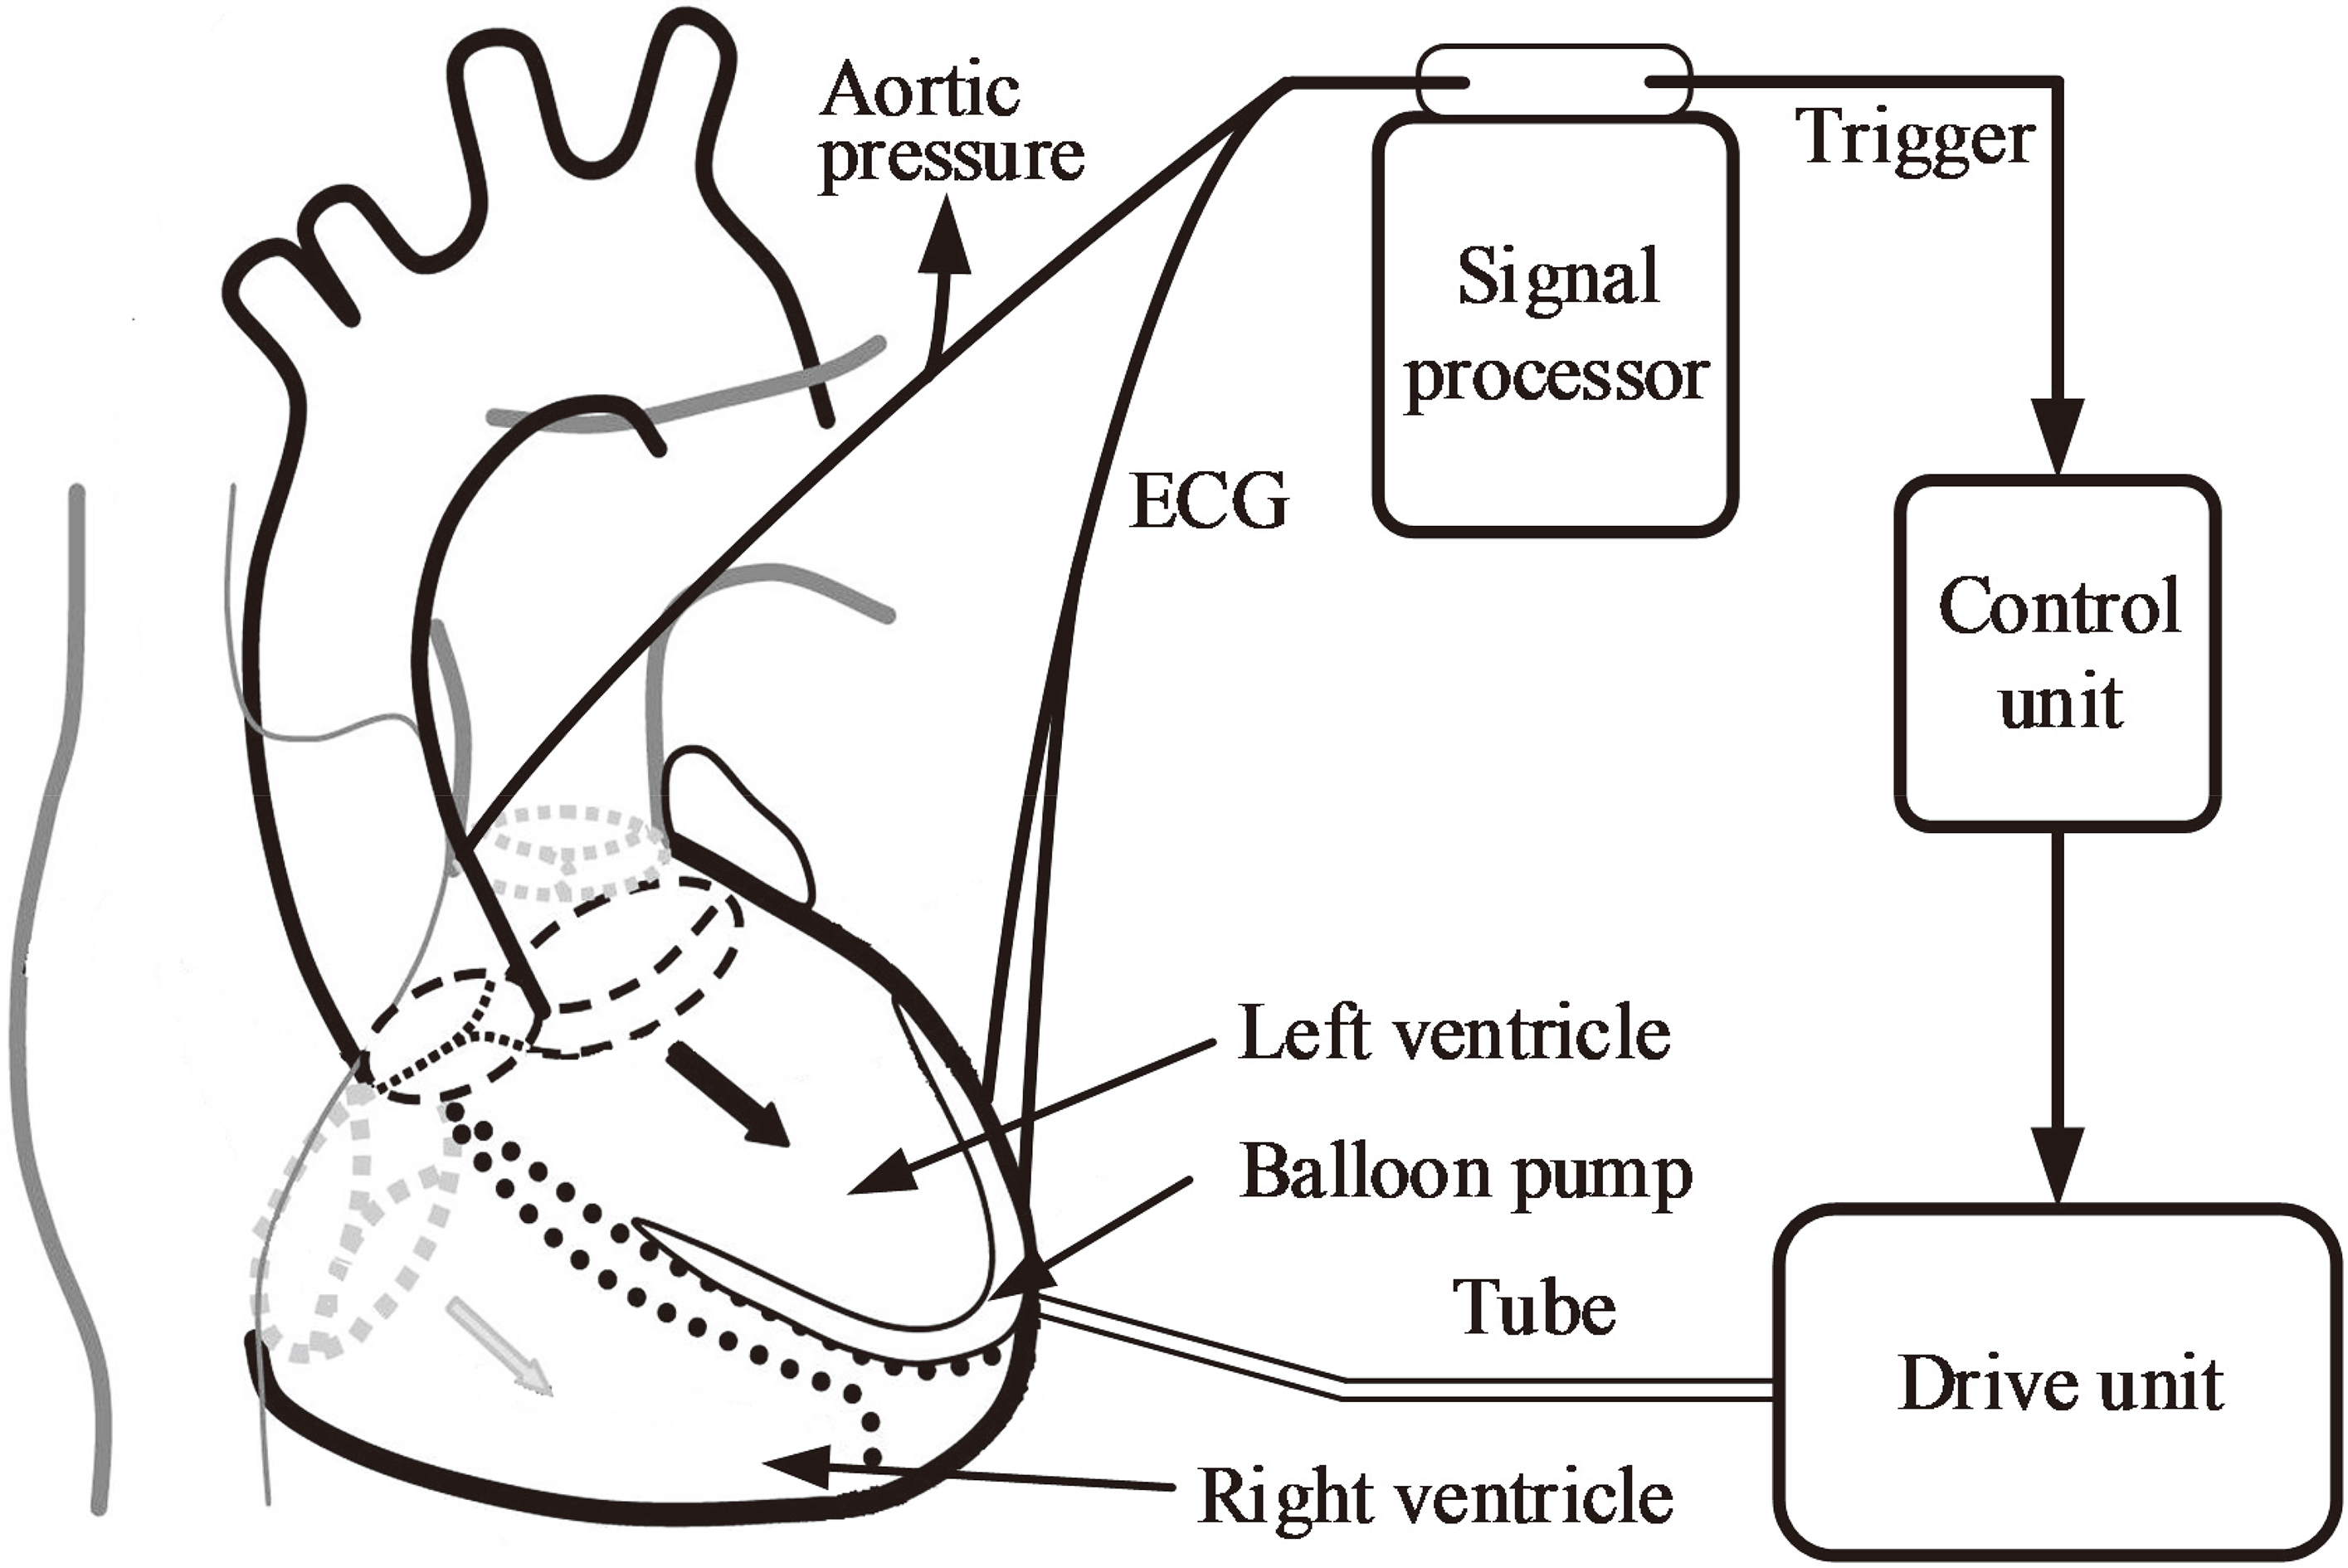 Schematic of a typical intra-ventricular assist device.